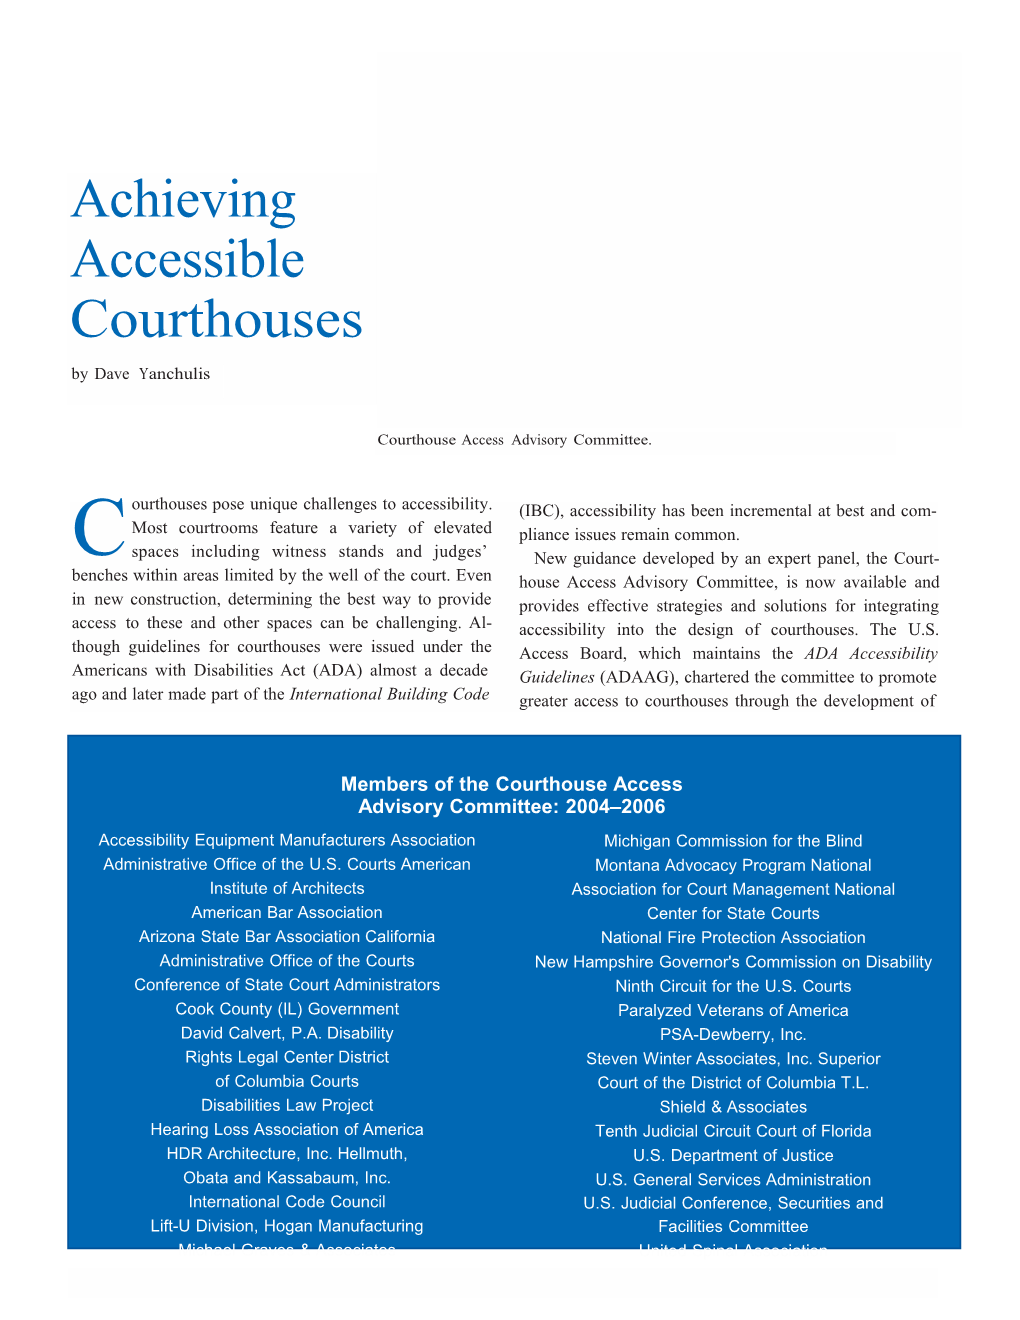 Achieving Accessible Courthouses Building Safety Journal 6/07